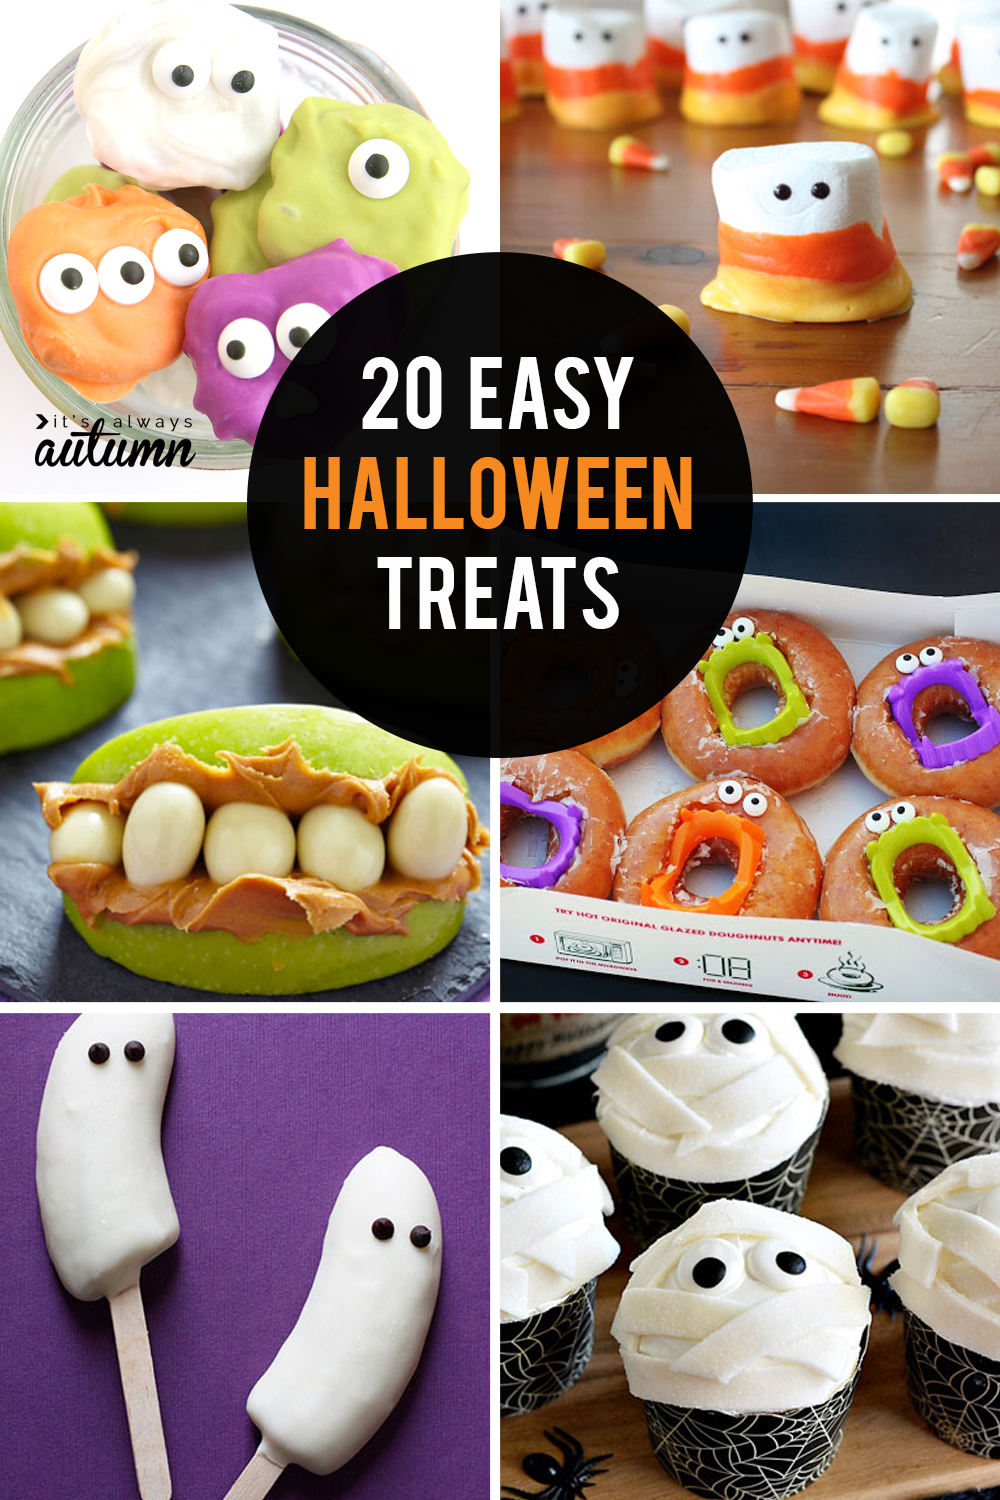 20-fun-easy-halloween-treats-to-make-with-your-kids-it-s-always-autumn